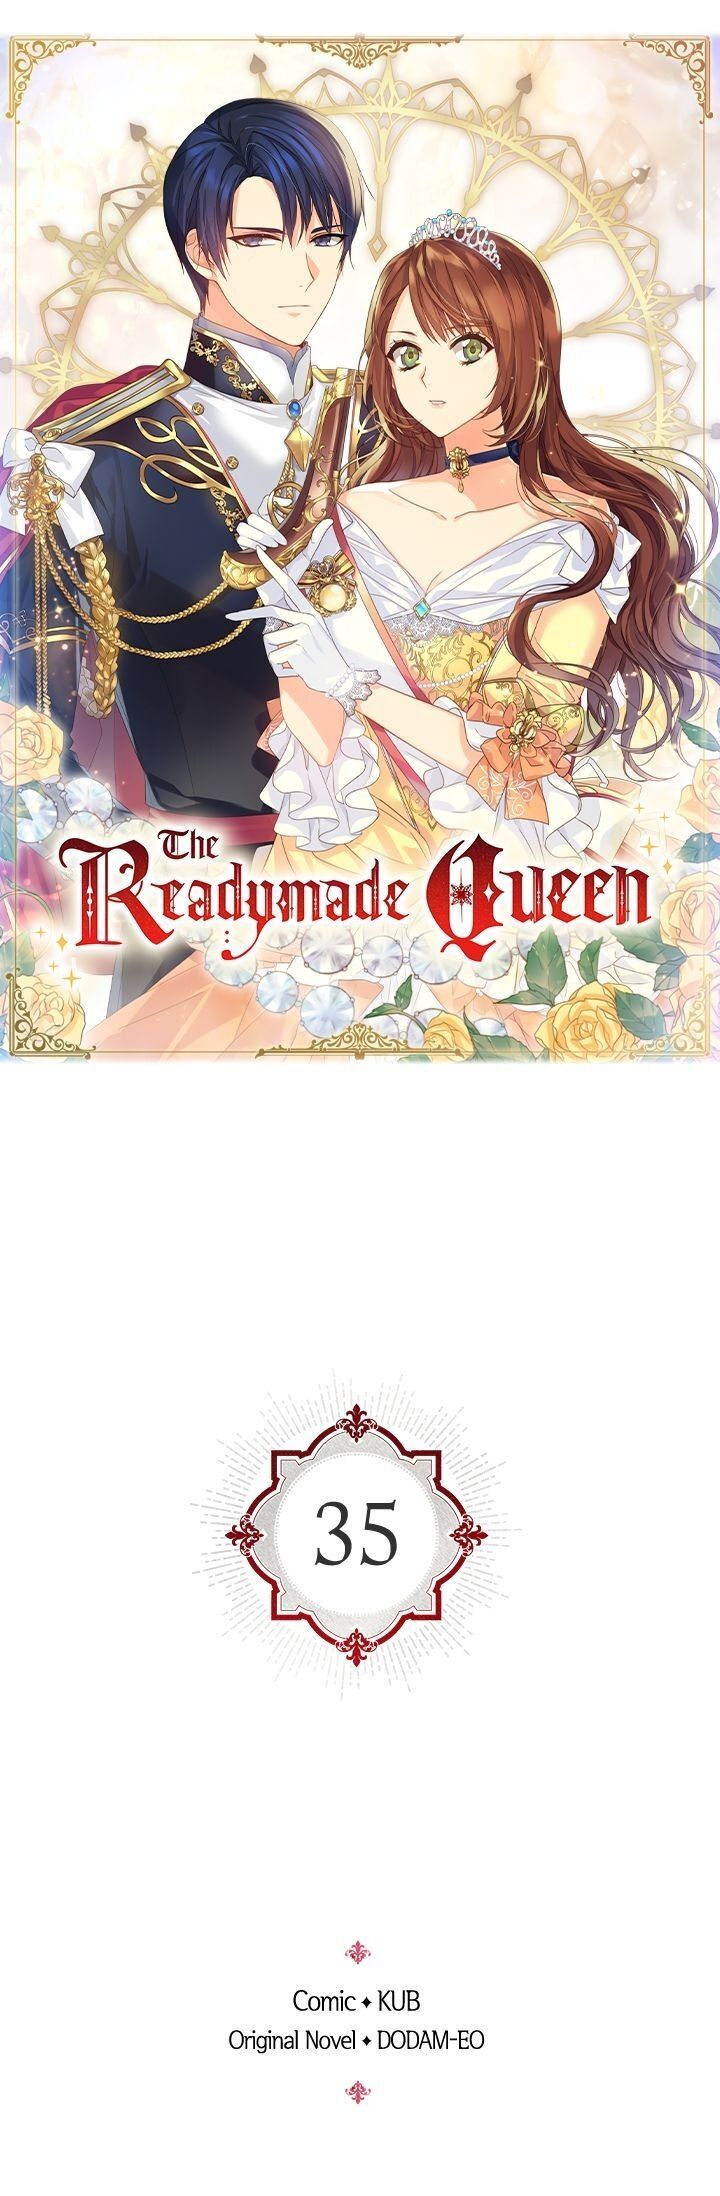 The Readymade Queen Chapter 35 page 1